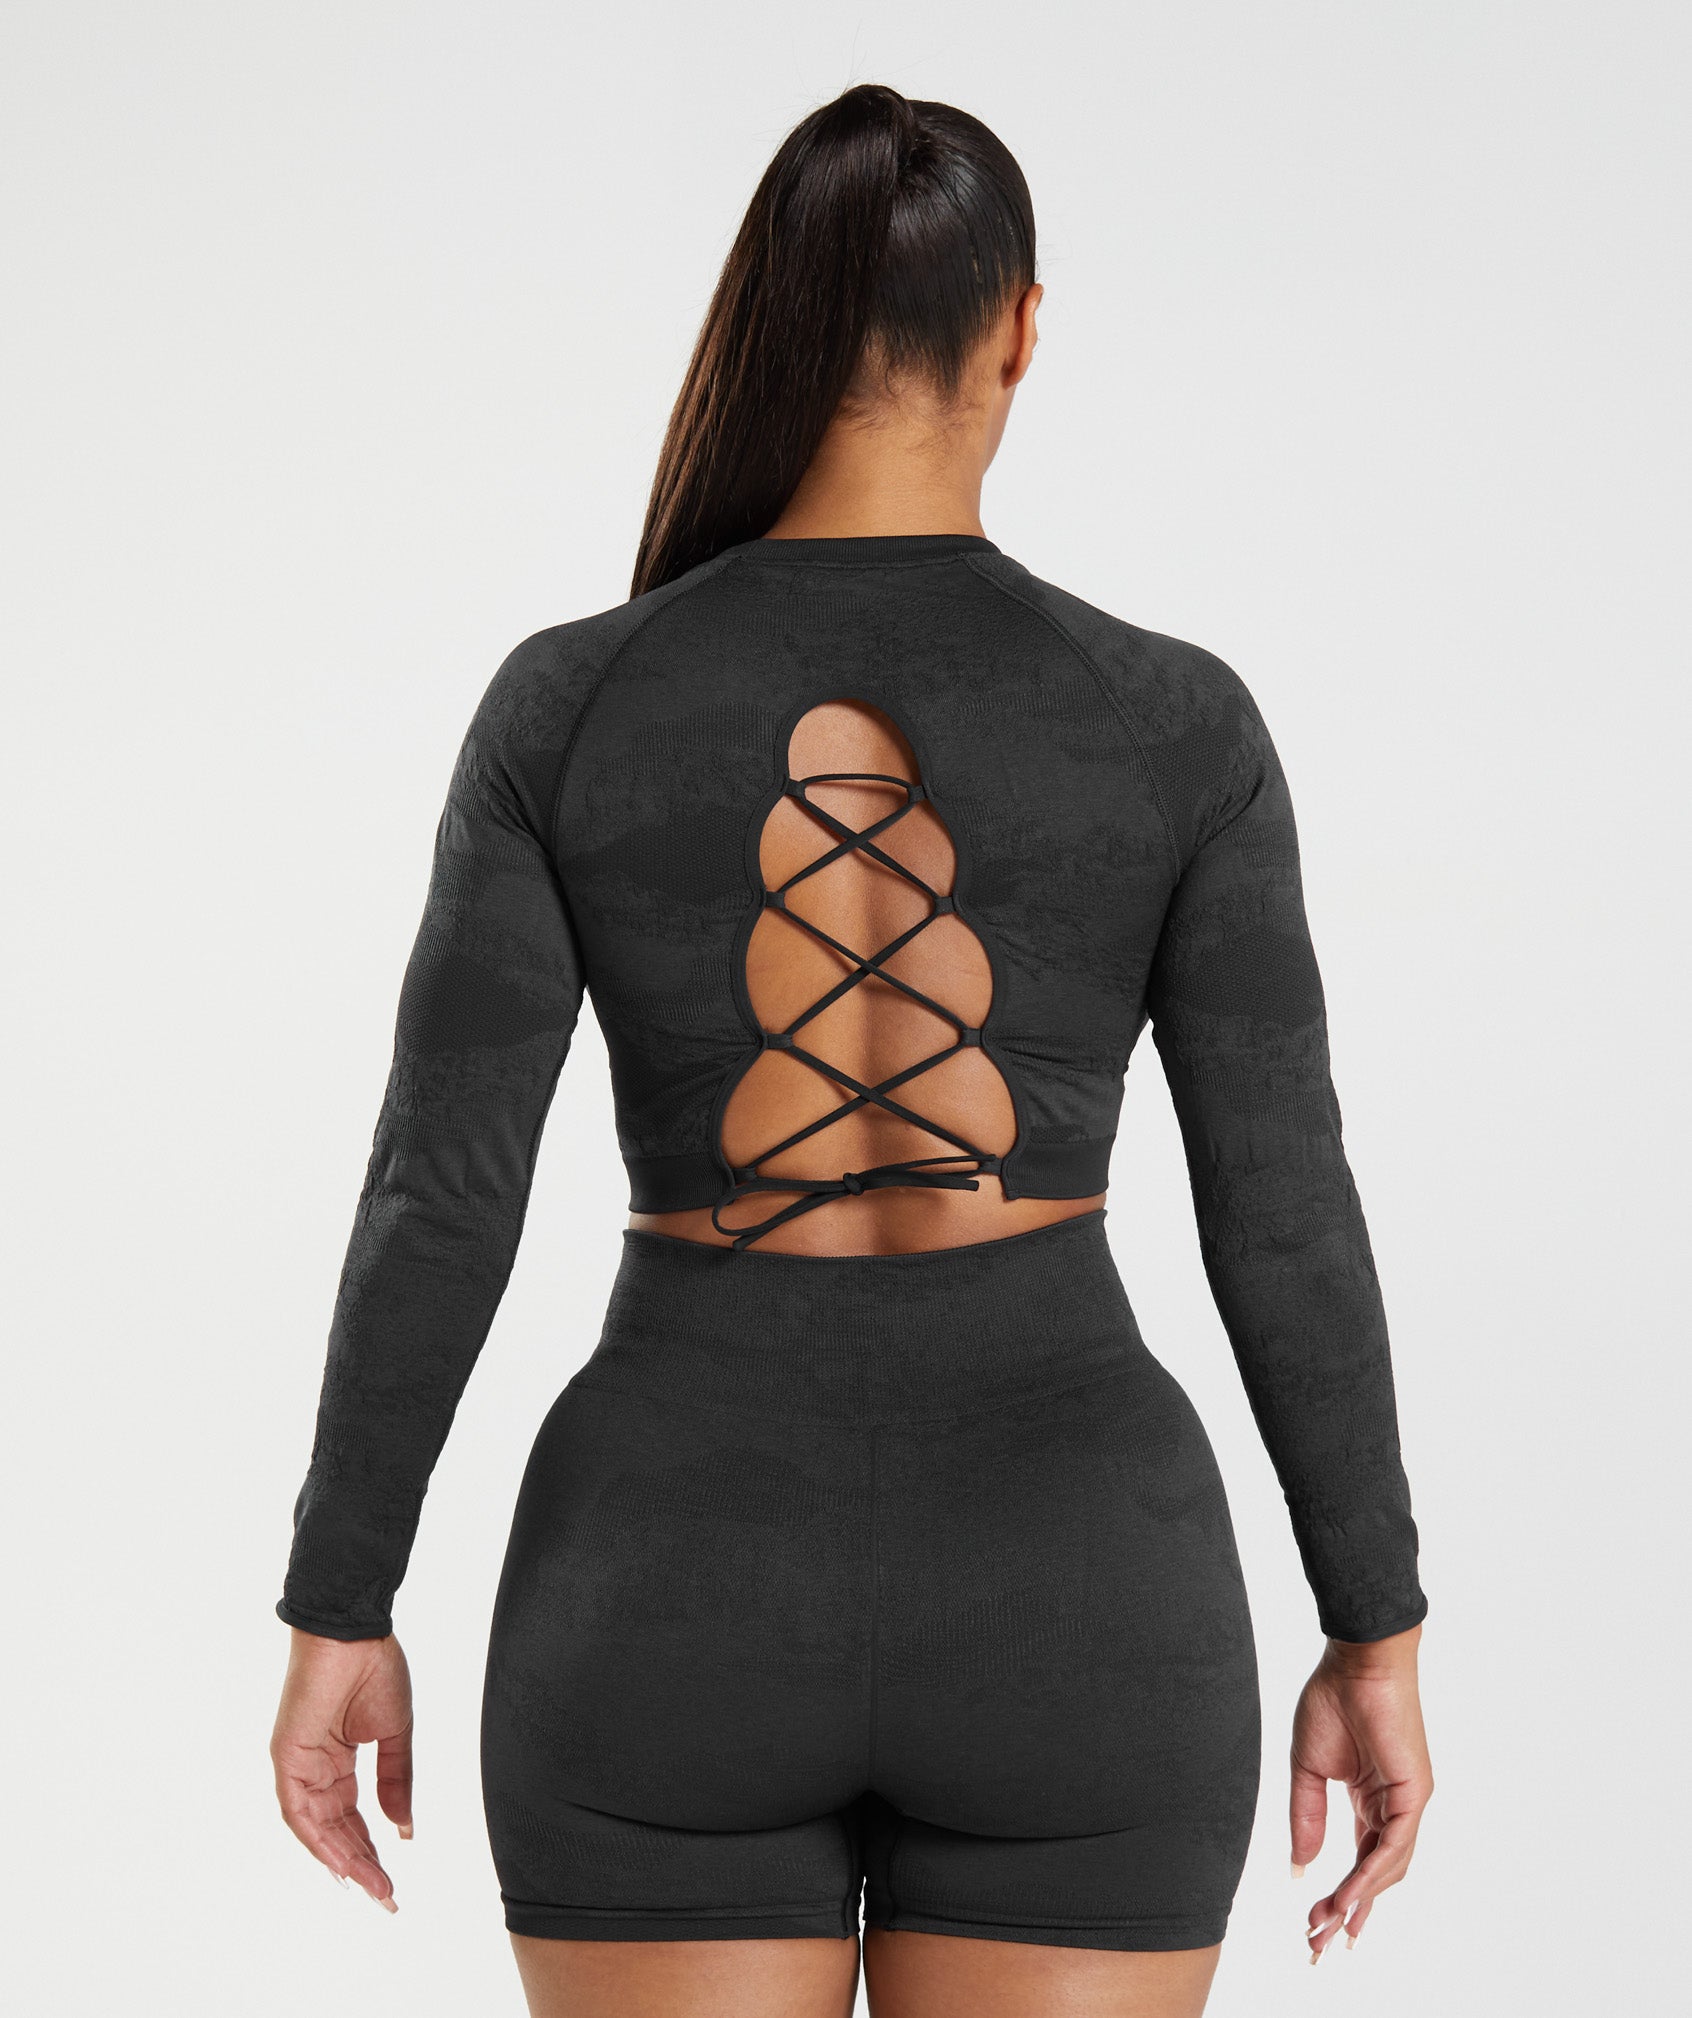 Seamless Lace Up Back Top Black/Onyx Grey | Gymshark